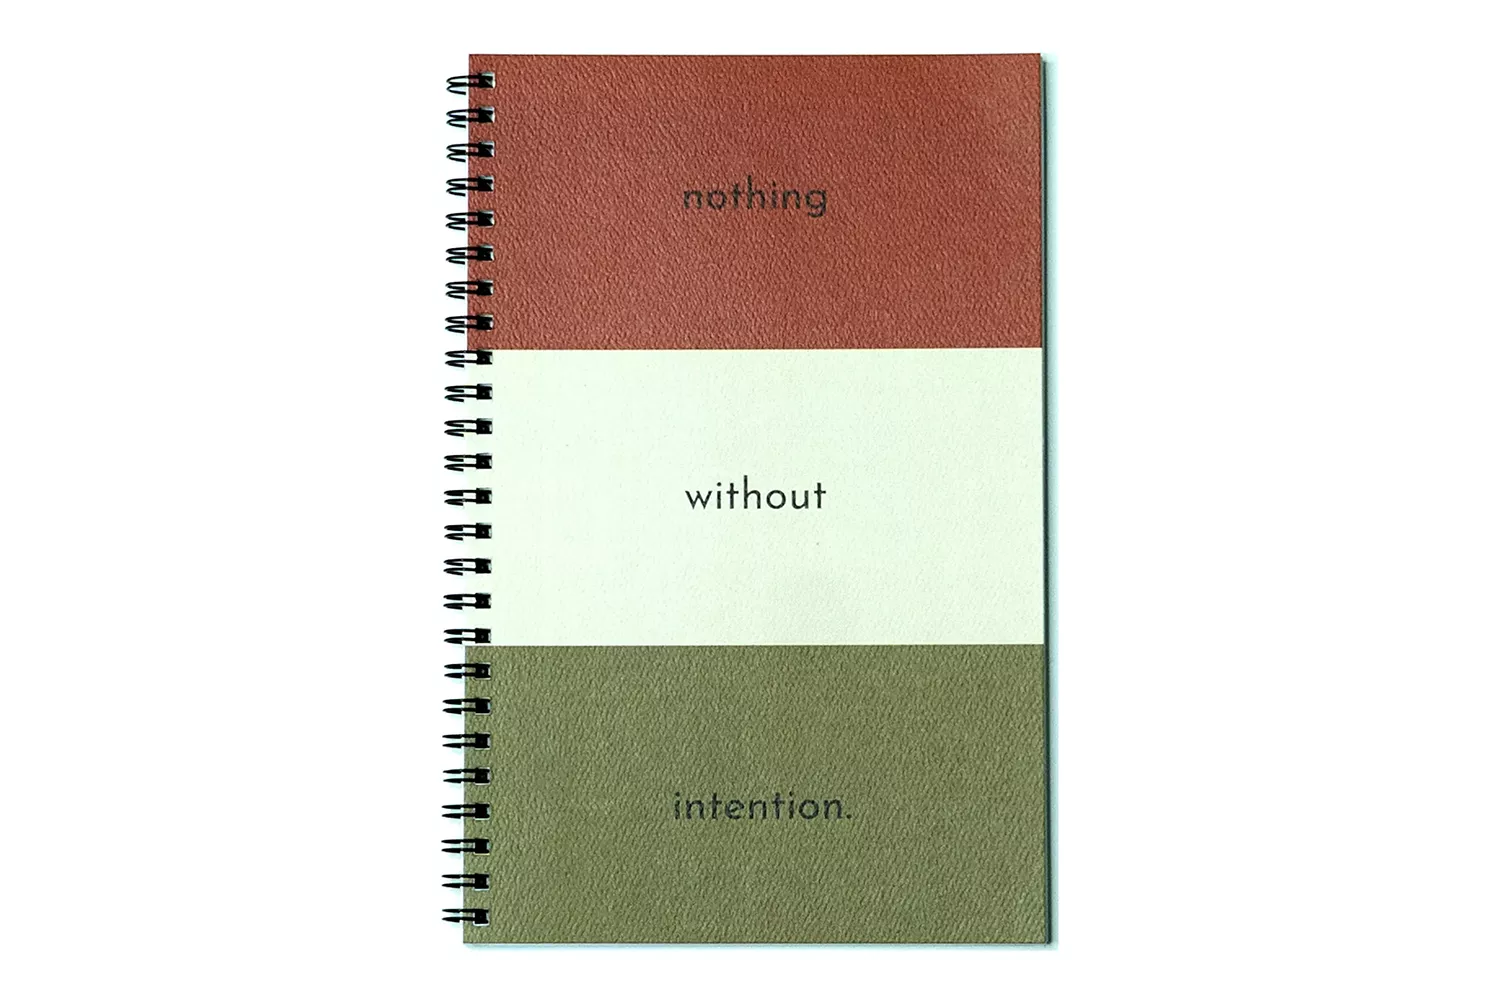 Aya Paper Co. Nothing Without Intention Lined Journal